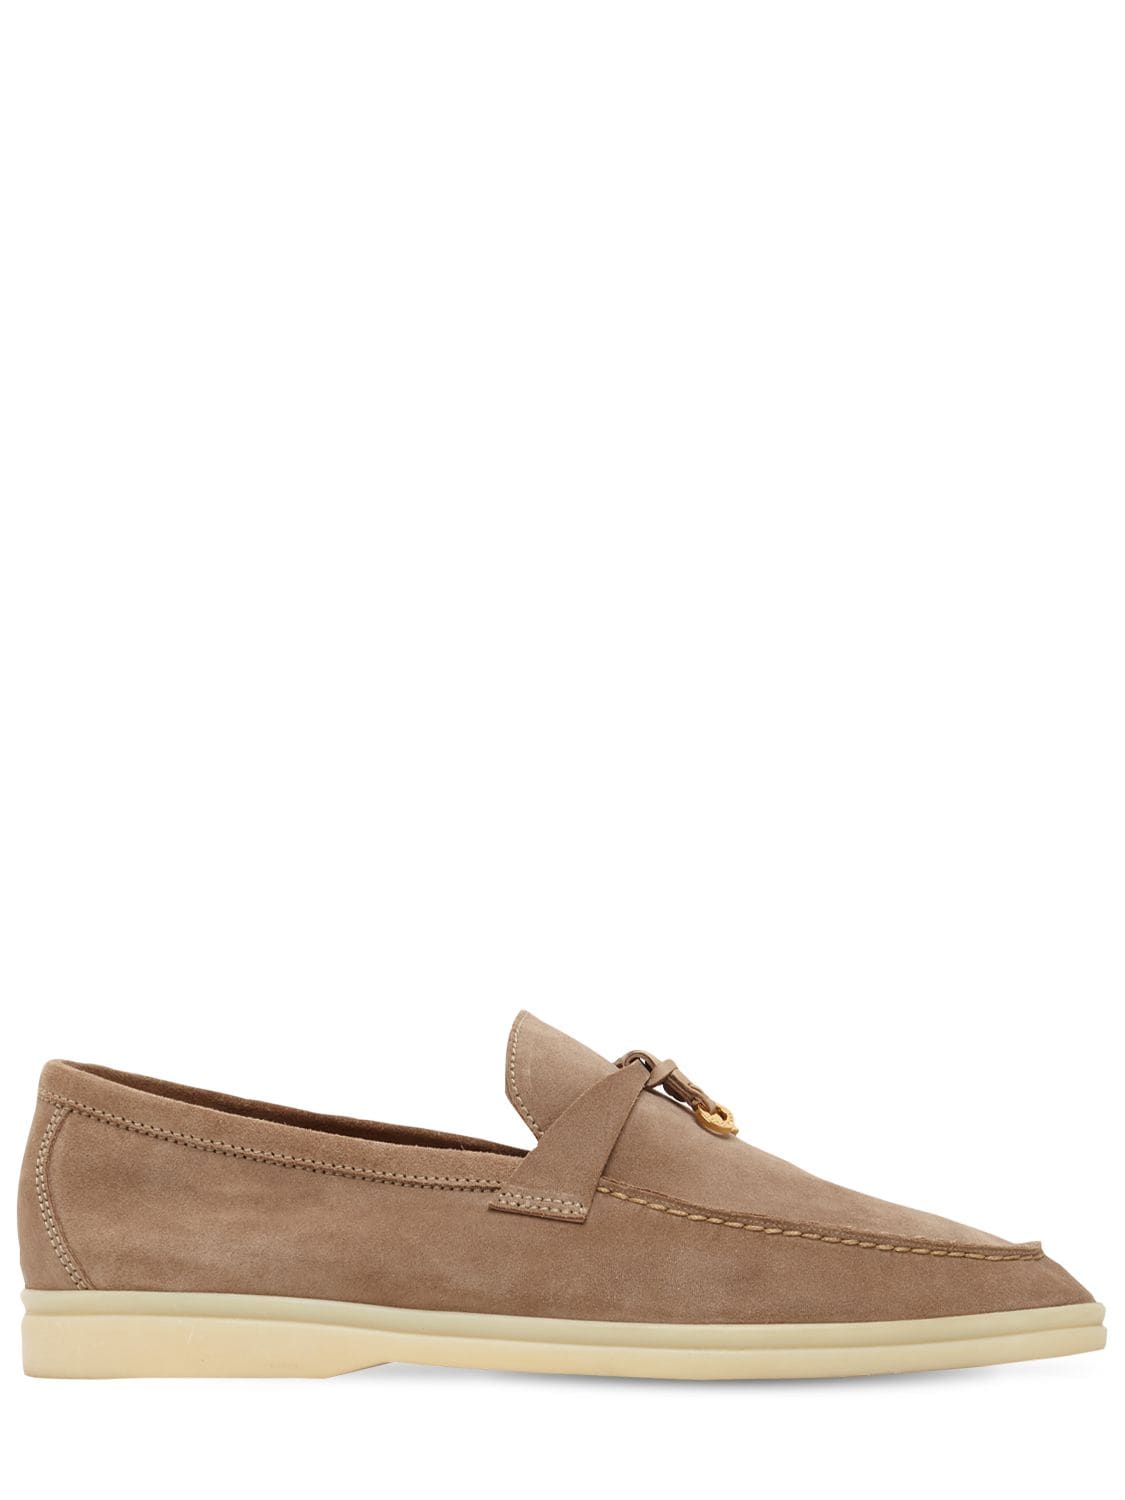 Loro Piana 10mm Summer Charms Walk Suede Loafers In Серо-коричневый